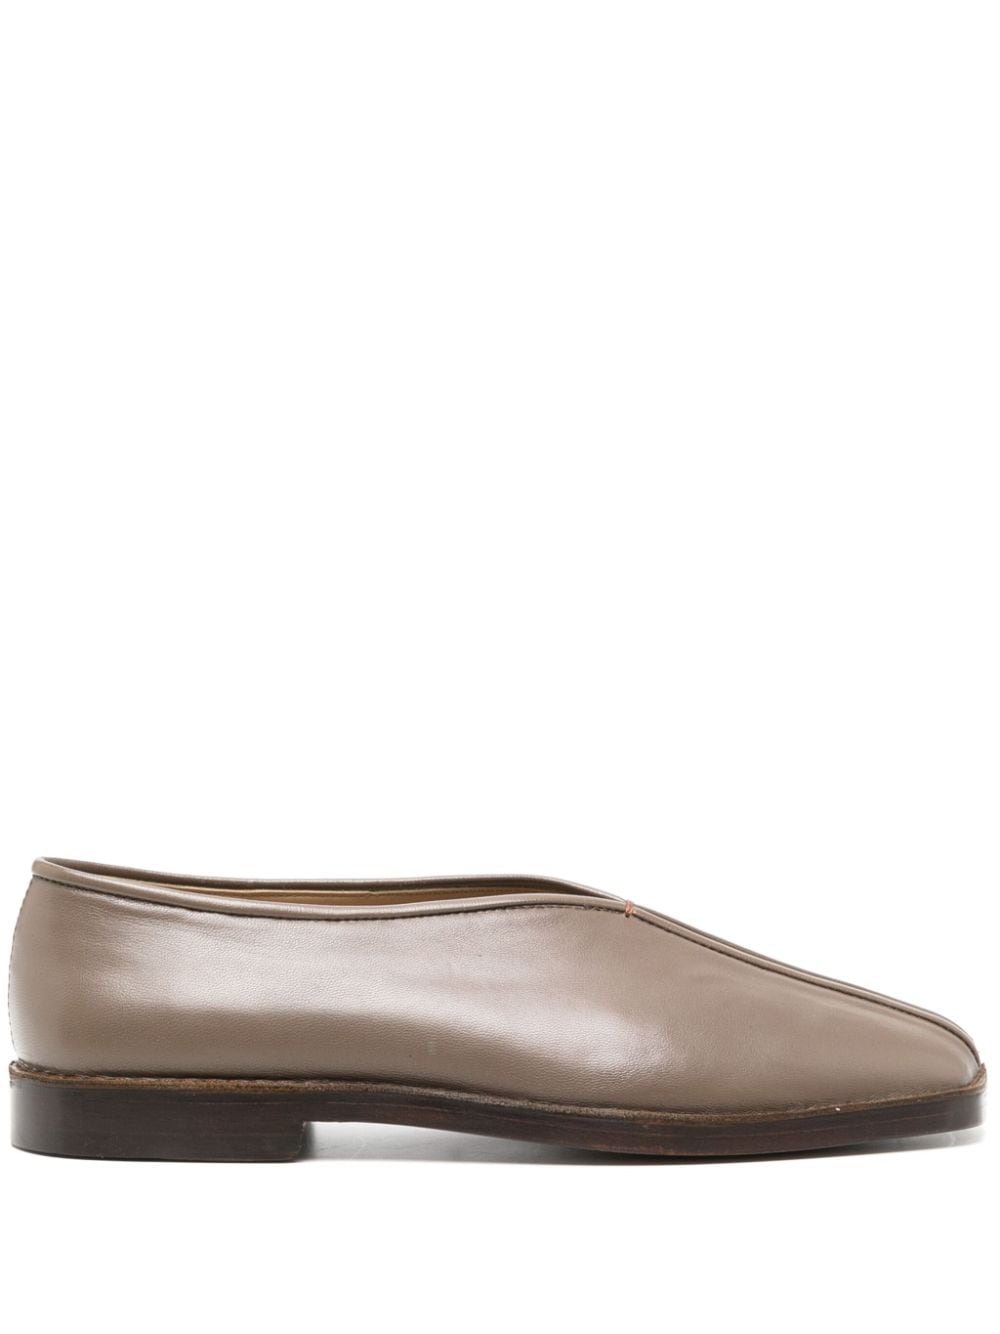 Lemaire Brown Flat Piped Slippers In Br487 Golden Brown